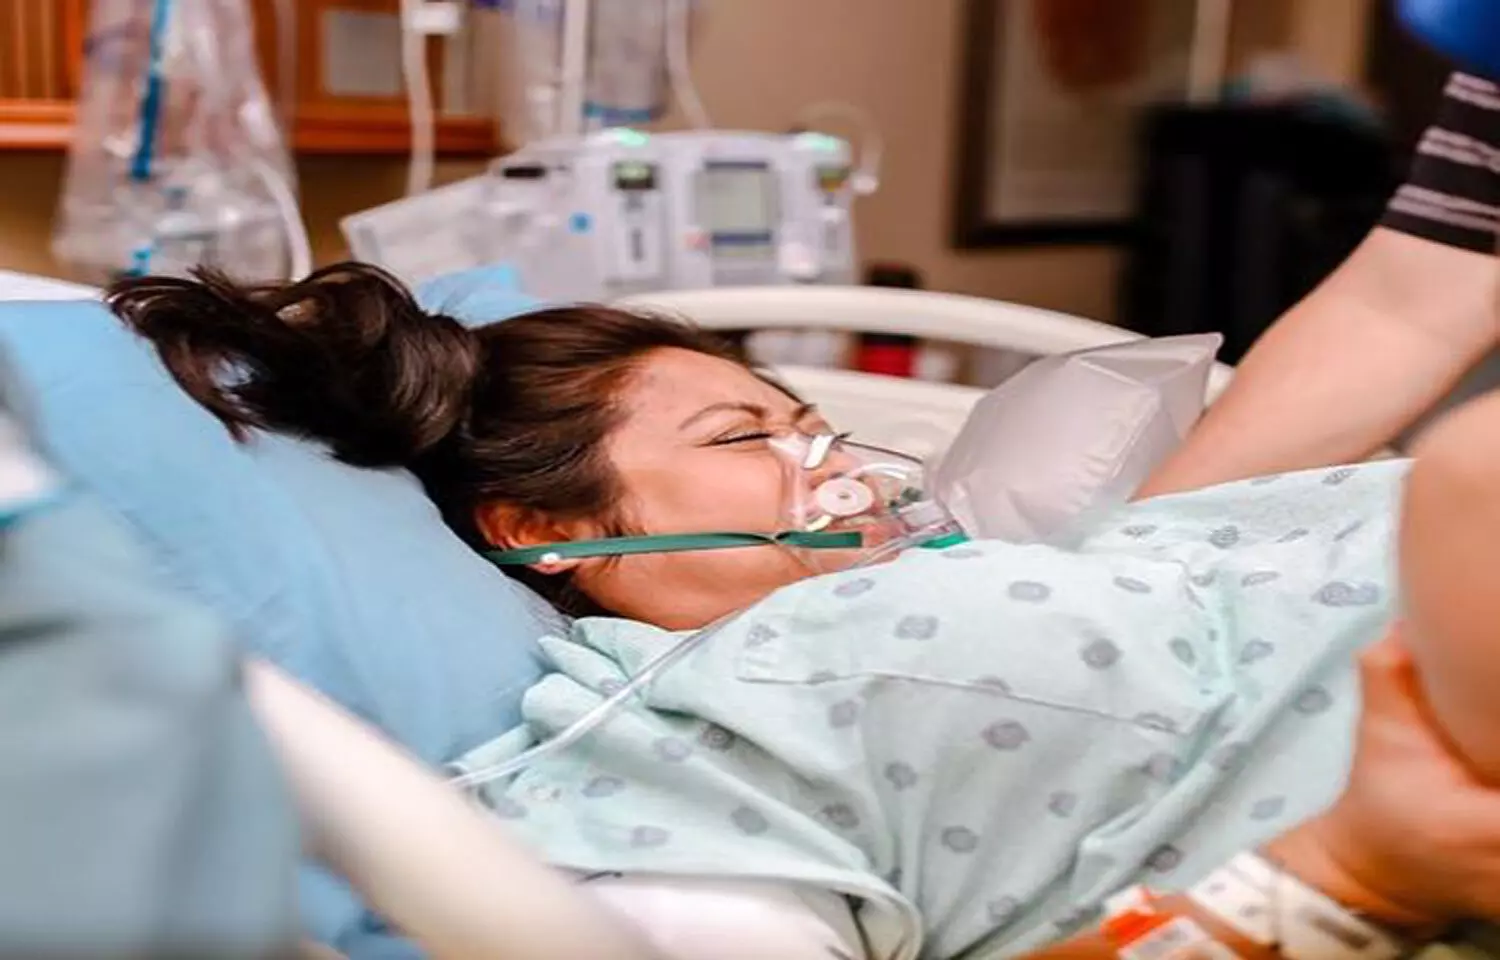 Supplemental oxygen to mothers during childbirth of no benefit to infants: JAMA